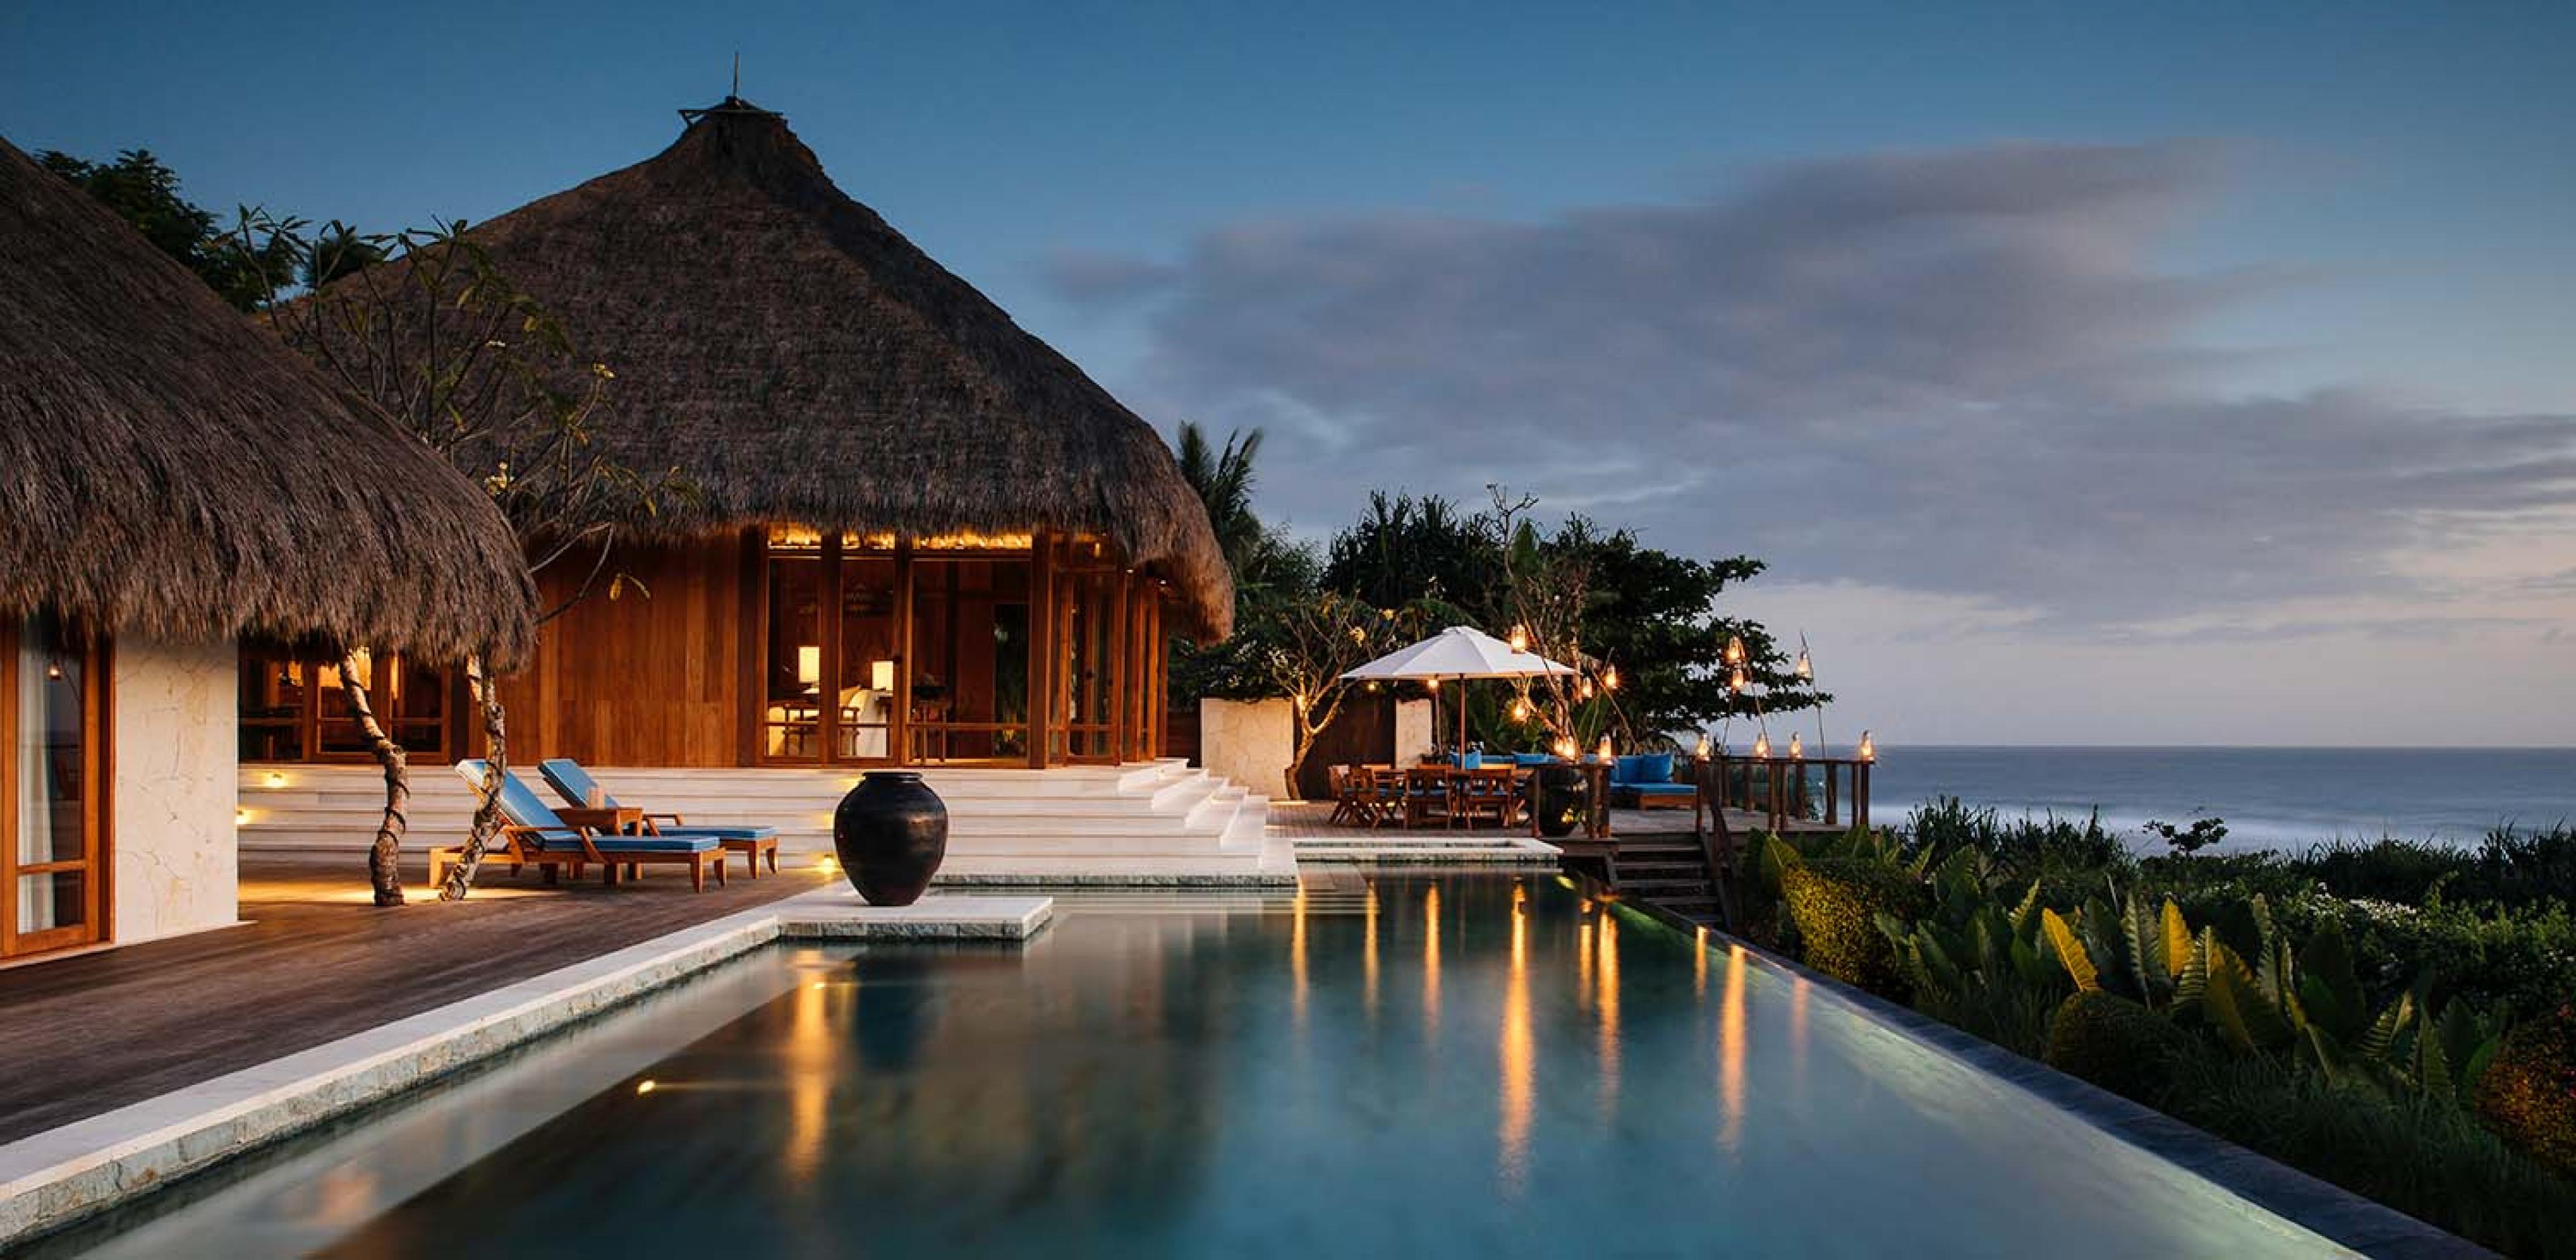 thatched roof villa with white steps leading down to a pool at dusk